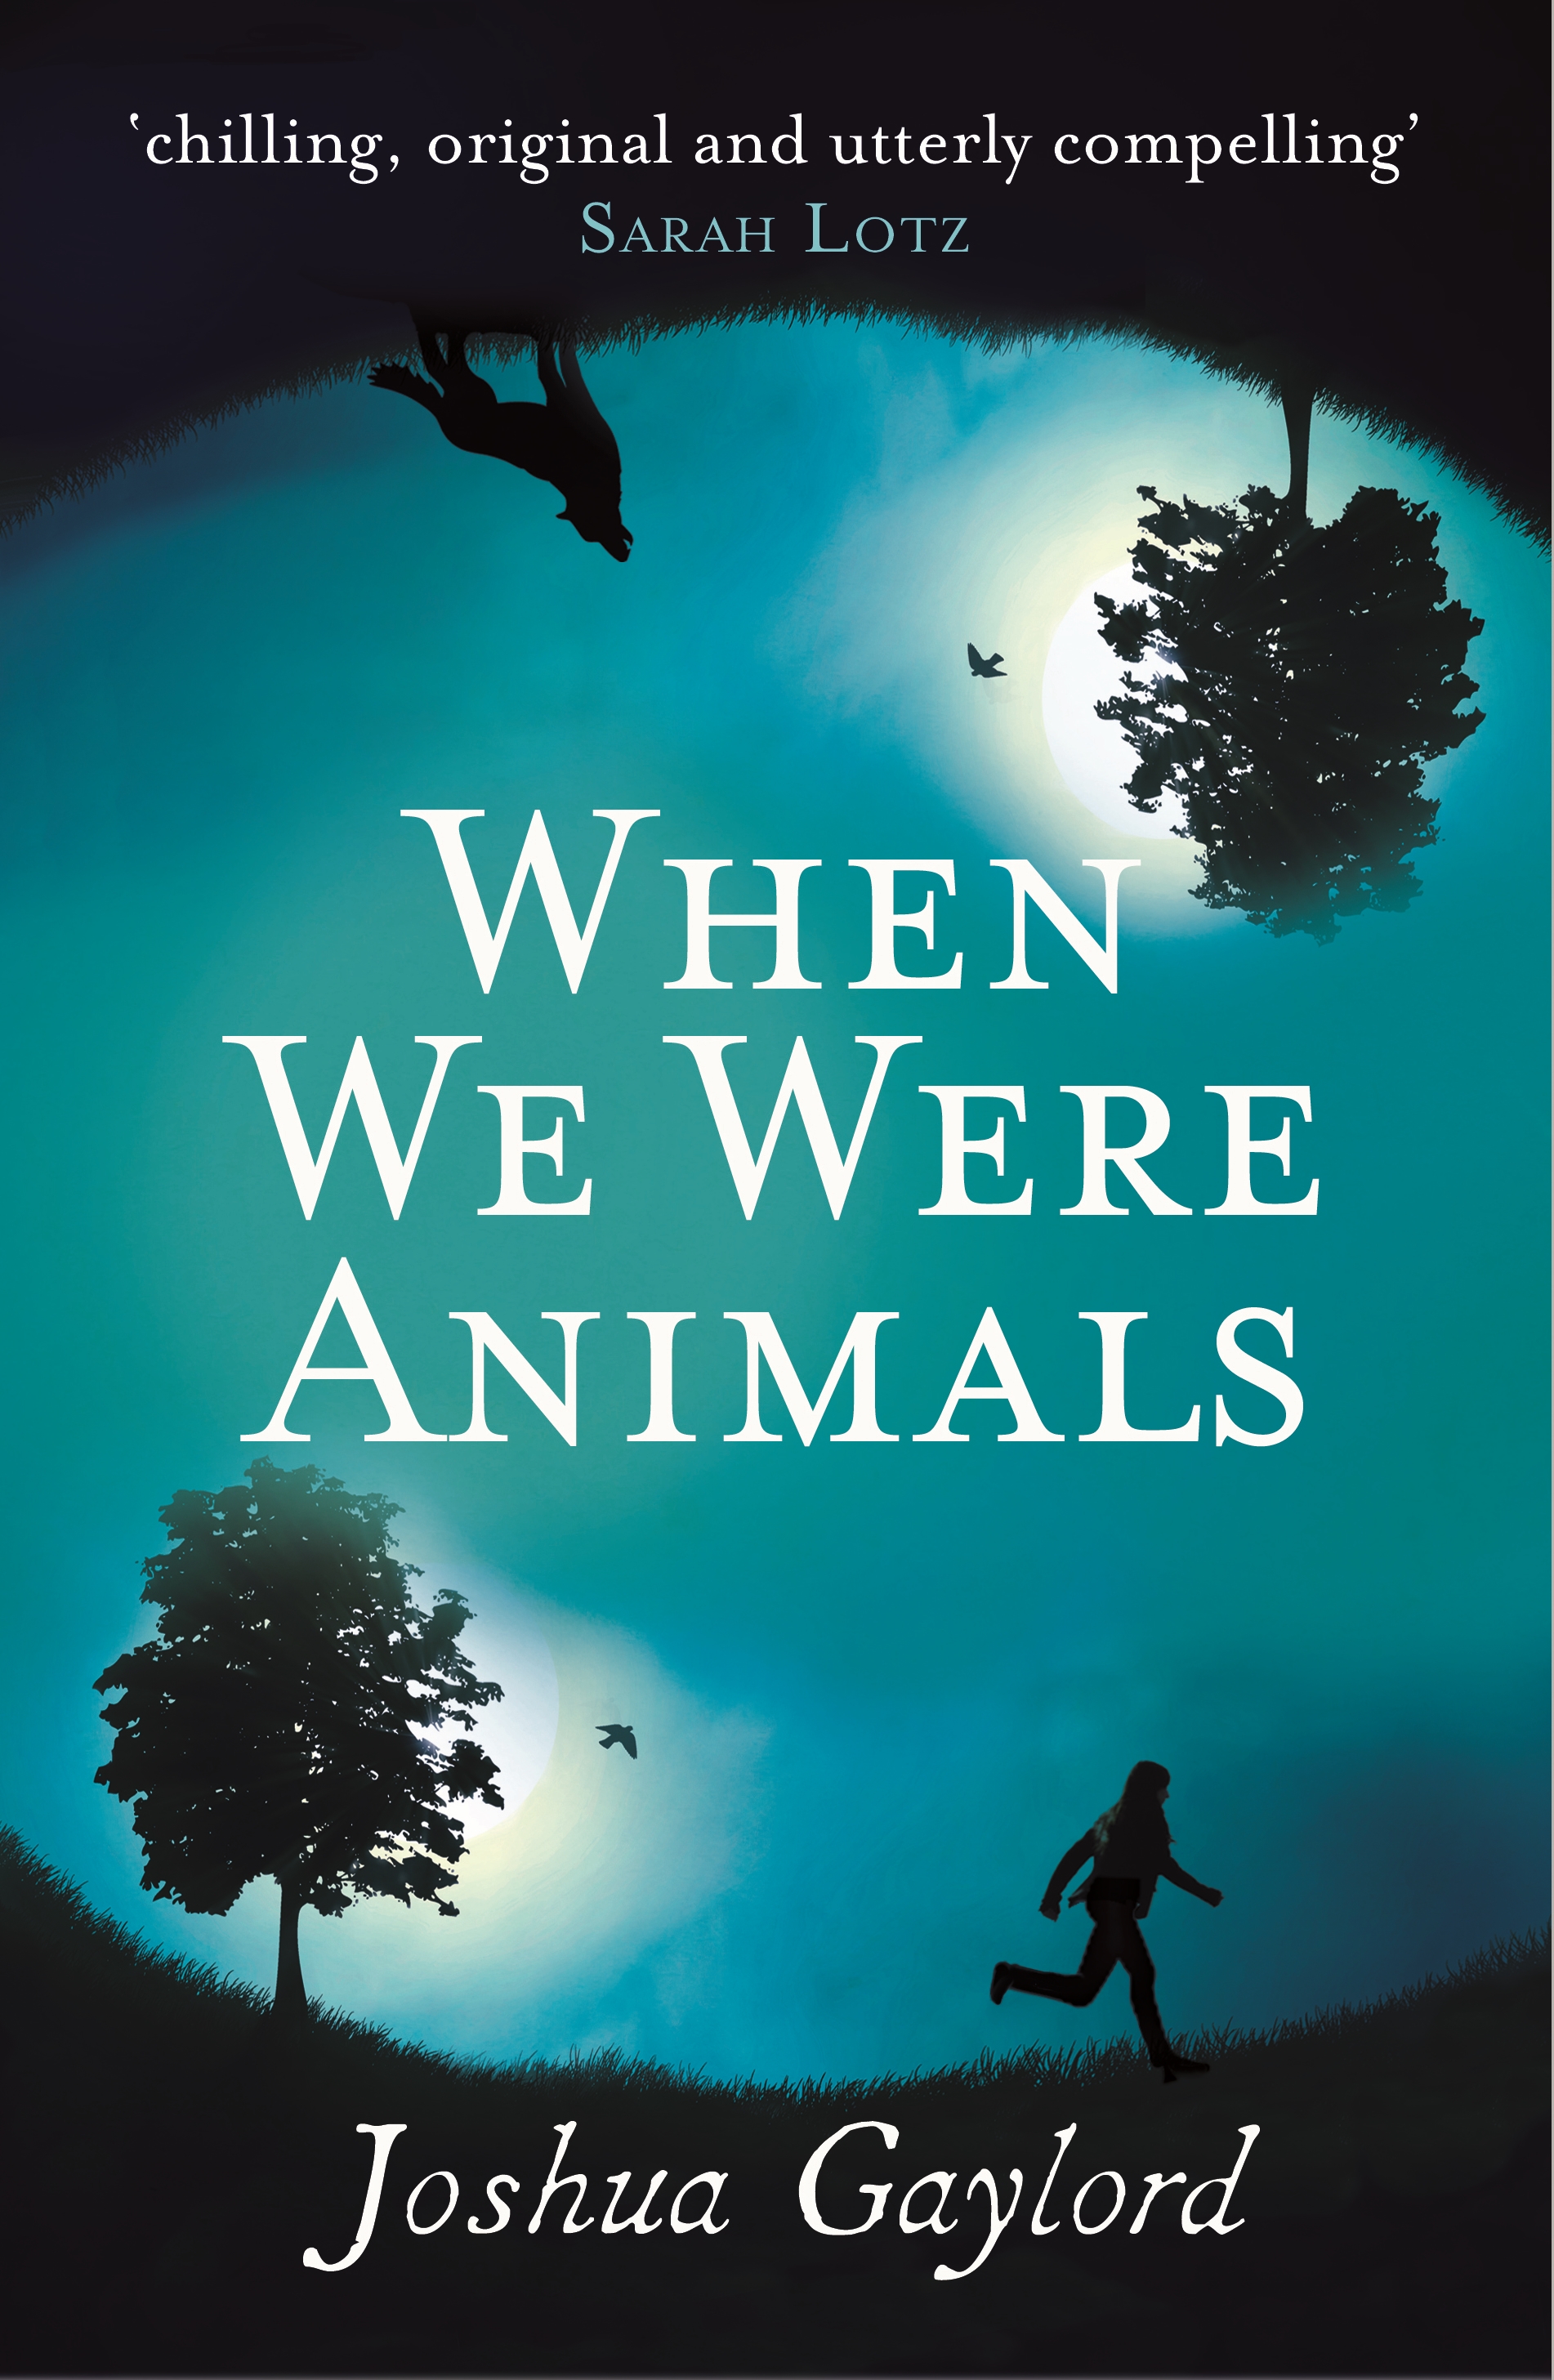 When We Were Animals by Joshua Gaylord - Penguin Books Australia